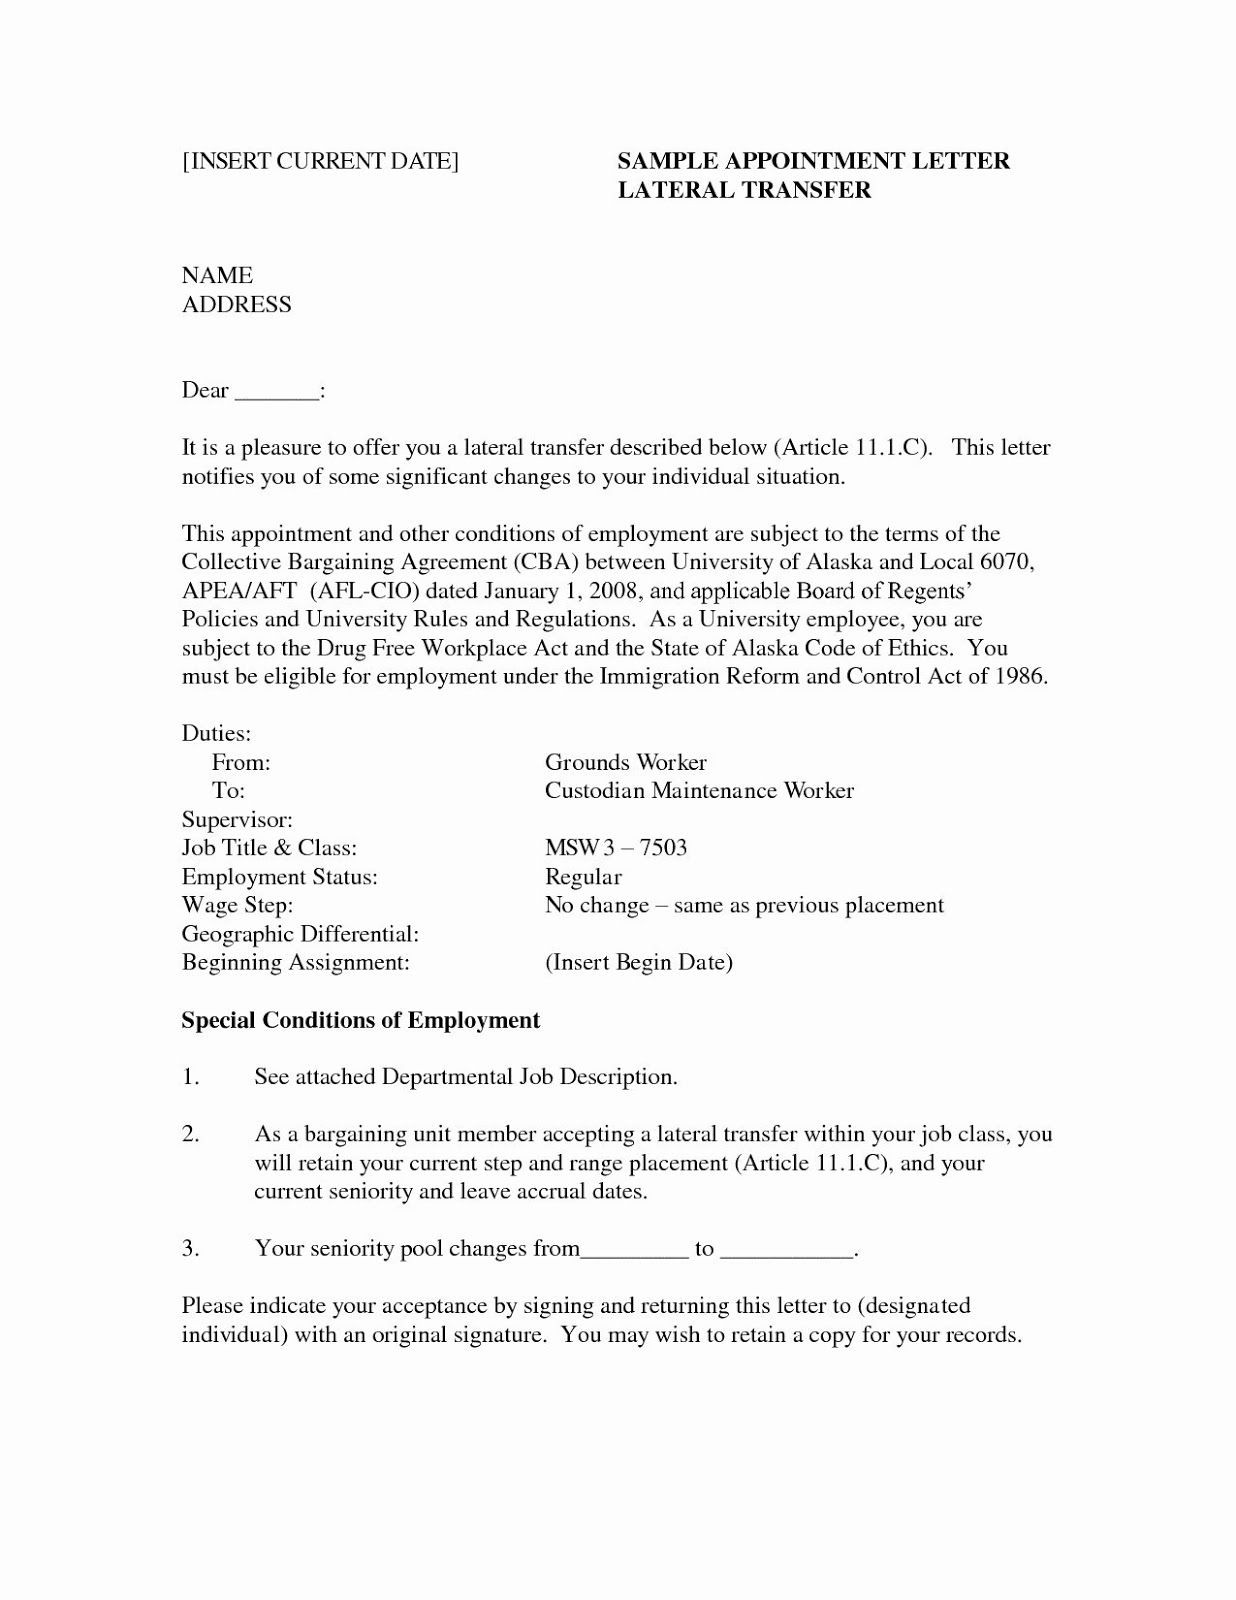 Sample Resume for Paralegal with No Experience Paralegal Resume Sample, Paralegal Resume Samples, Paralegal …